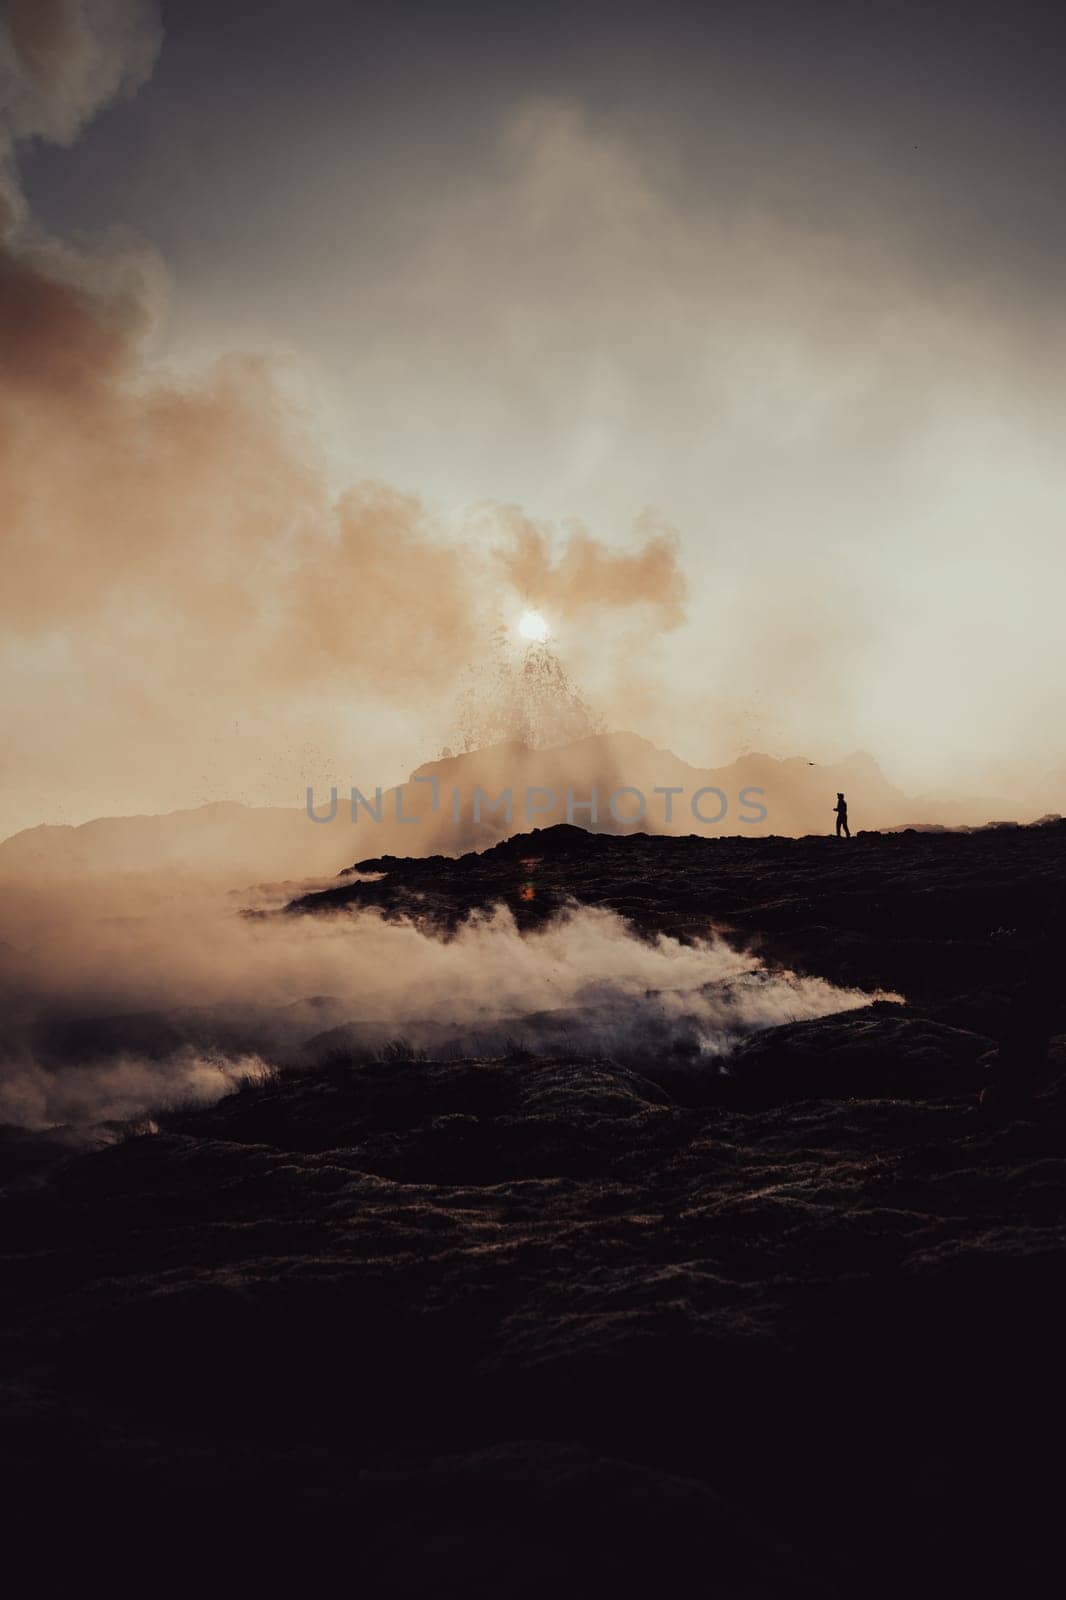 An epic shot of a drone pilot launching his drone. A small silhouette next to the dramatic volcano with erupting lava. The sun's disk is visible behind the lava spatter. The ground and the background are covered with smoke of the burning moss and lava. 2023 Litli-Hrutur volcano eruption, Fagradalsfjall Volcano, Reykjanes Peninsula, Iceland.